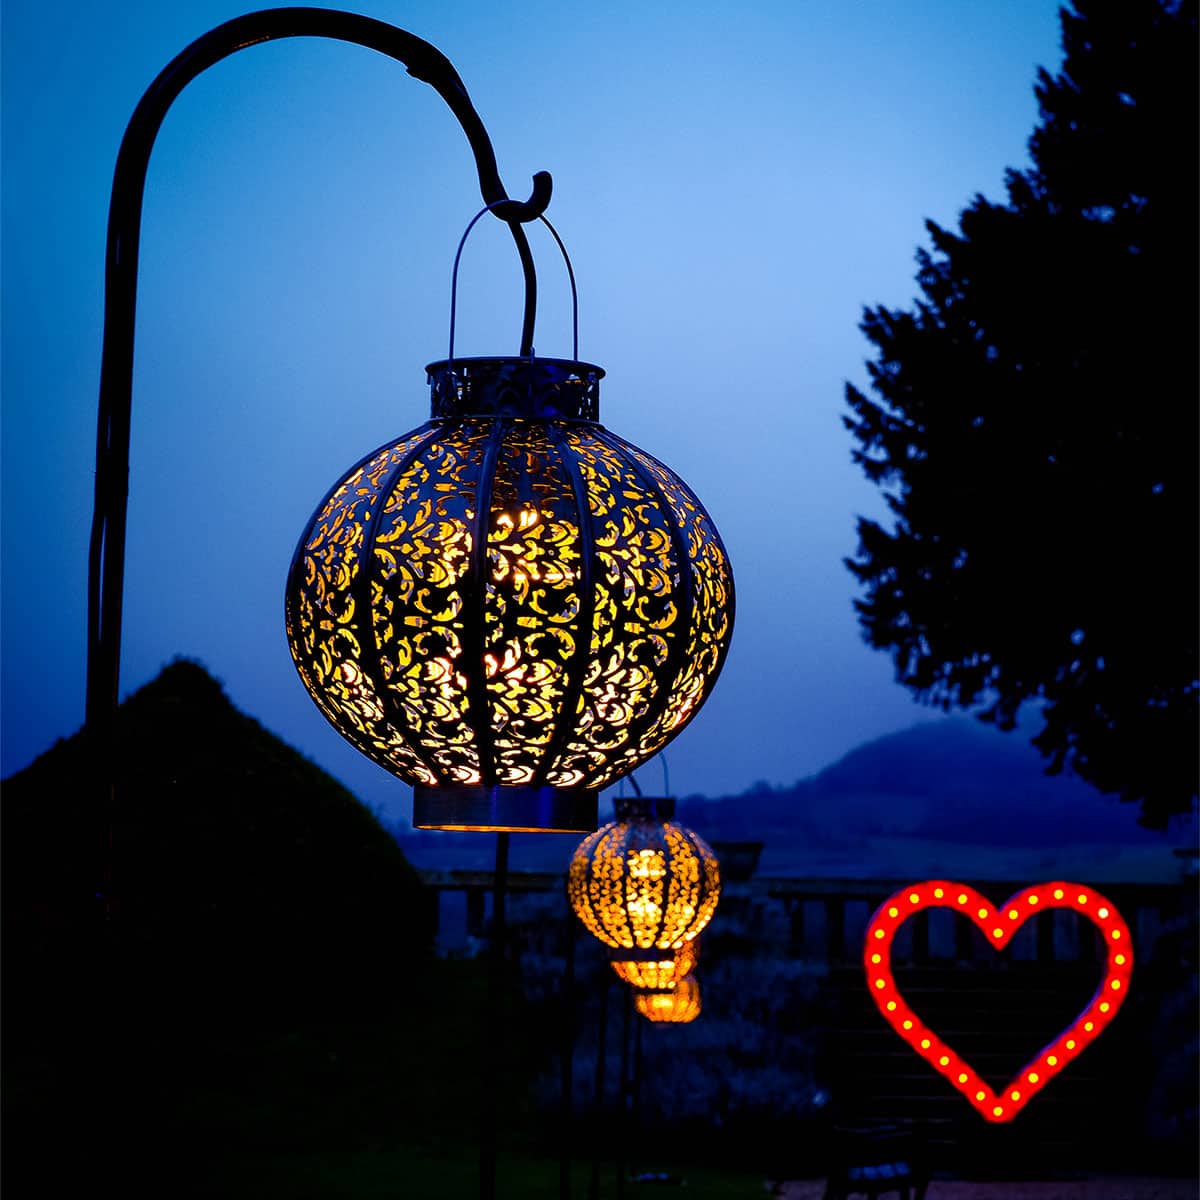 Experience a Spectacle of Light with Moroccan lamps and light displays 